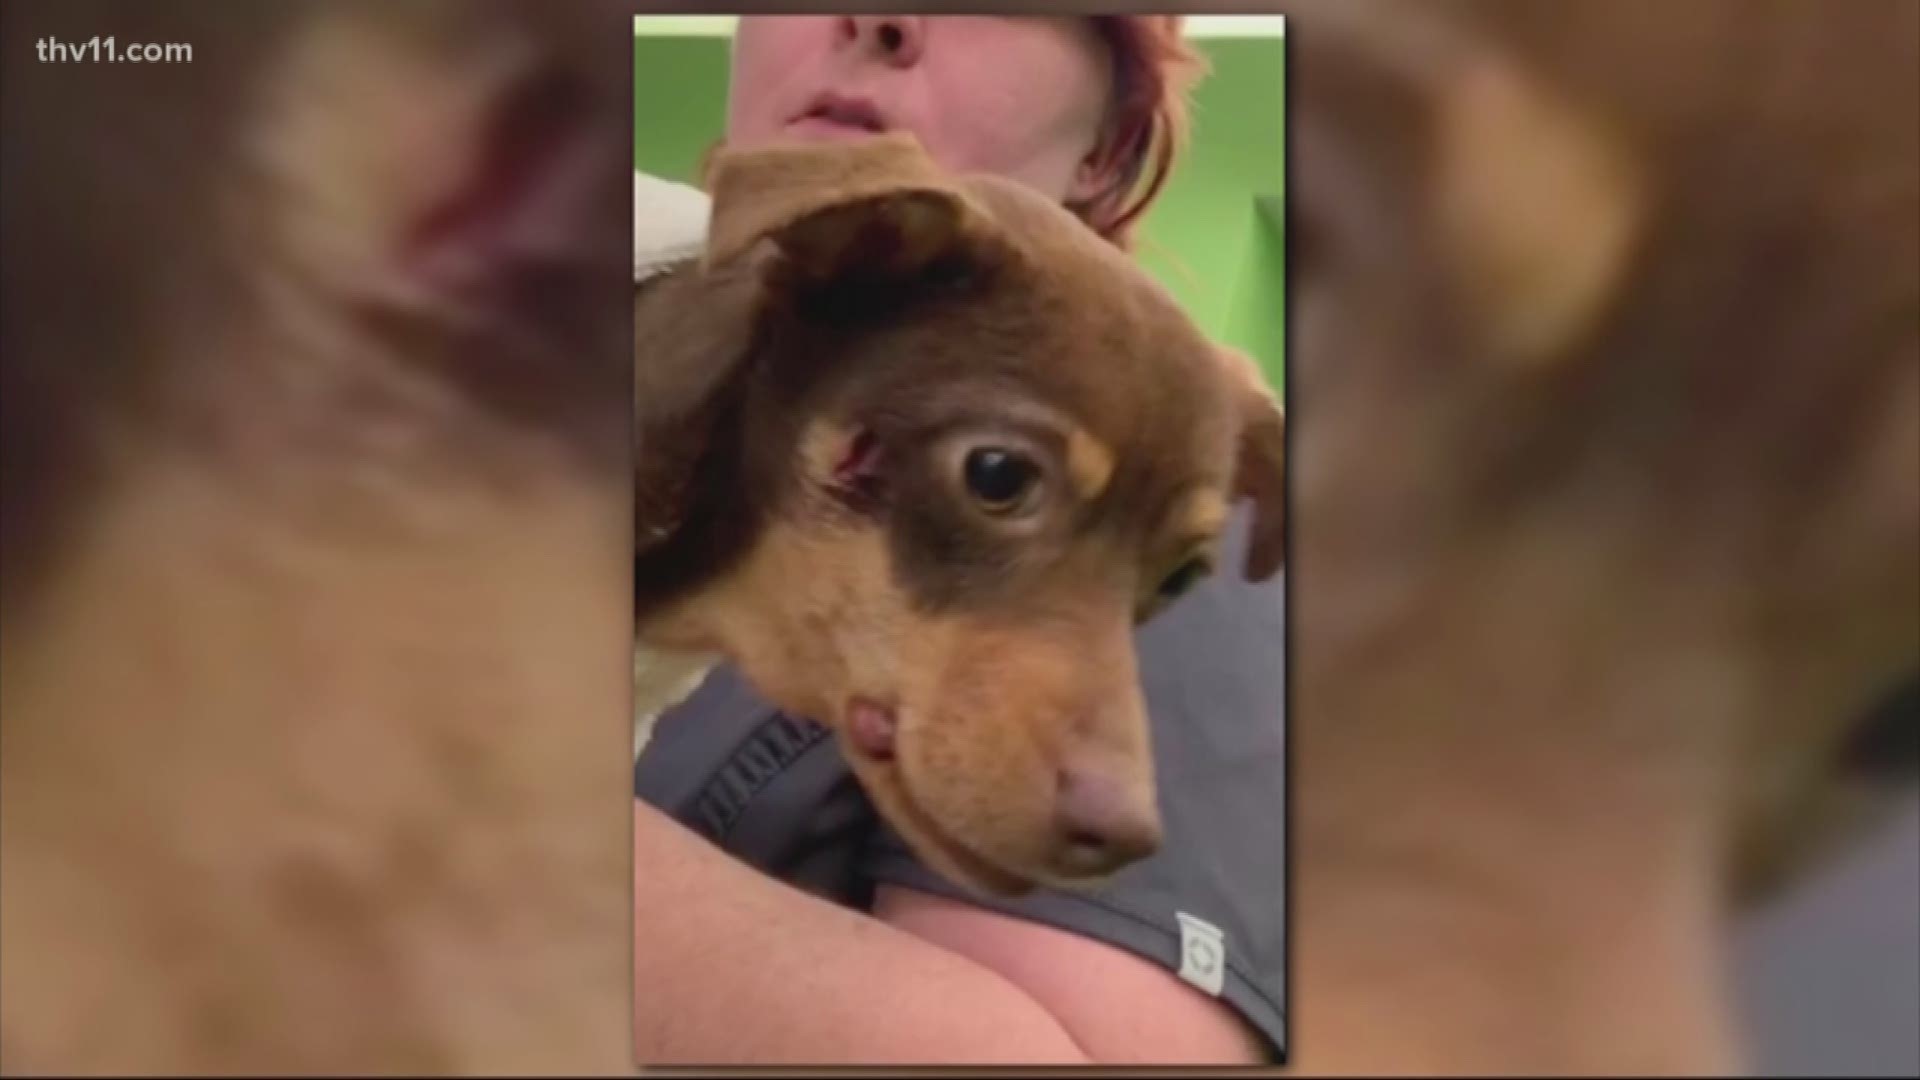 New video is sparking outrage online.
The clip – showing a Faulkner County sheriff's deputy shoot a dog during a call for service – has been shared thousands of times.